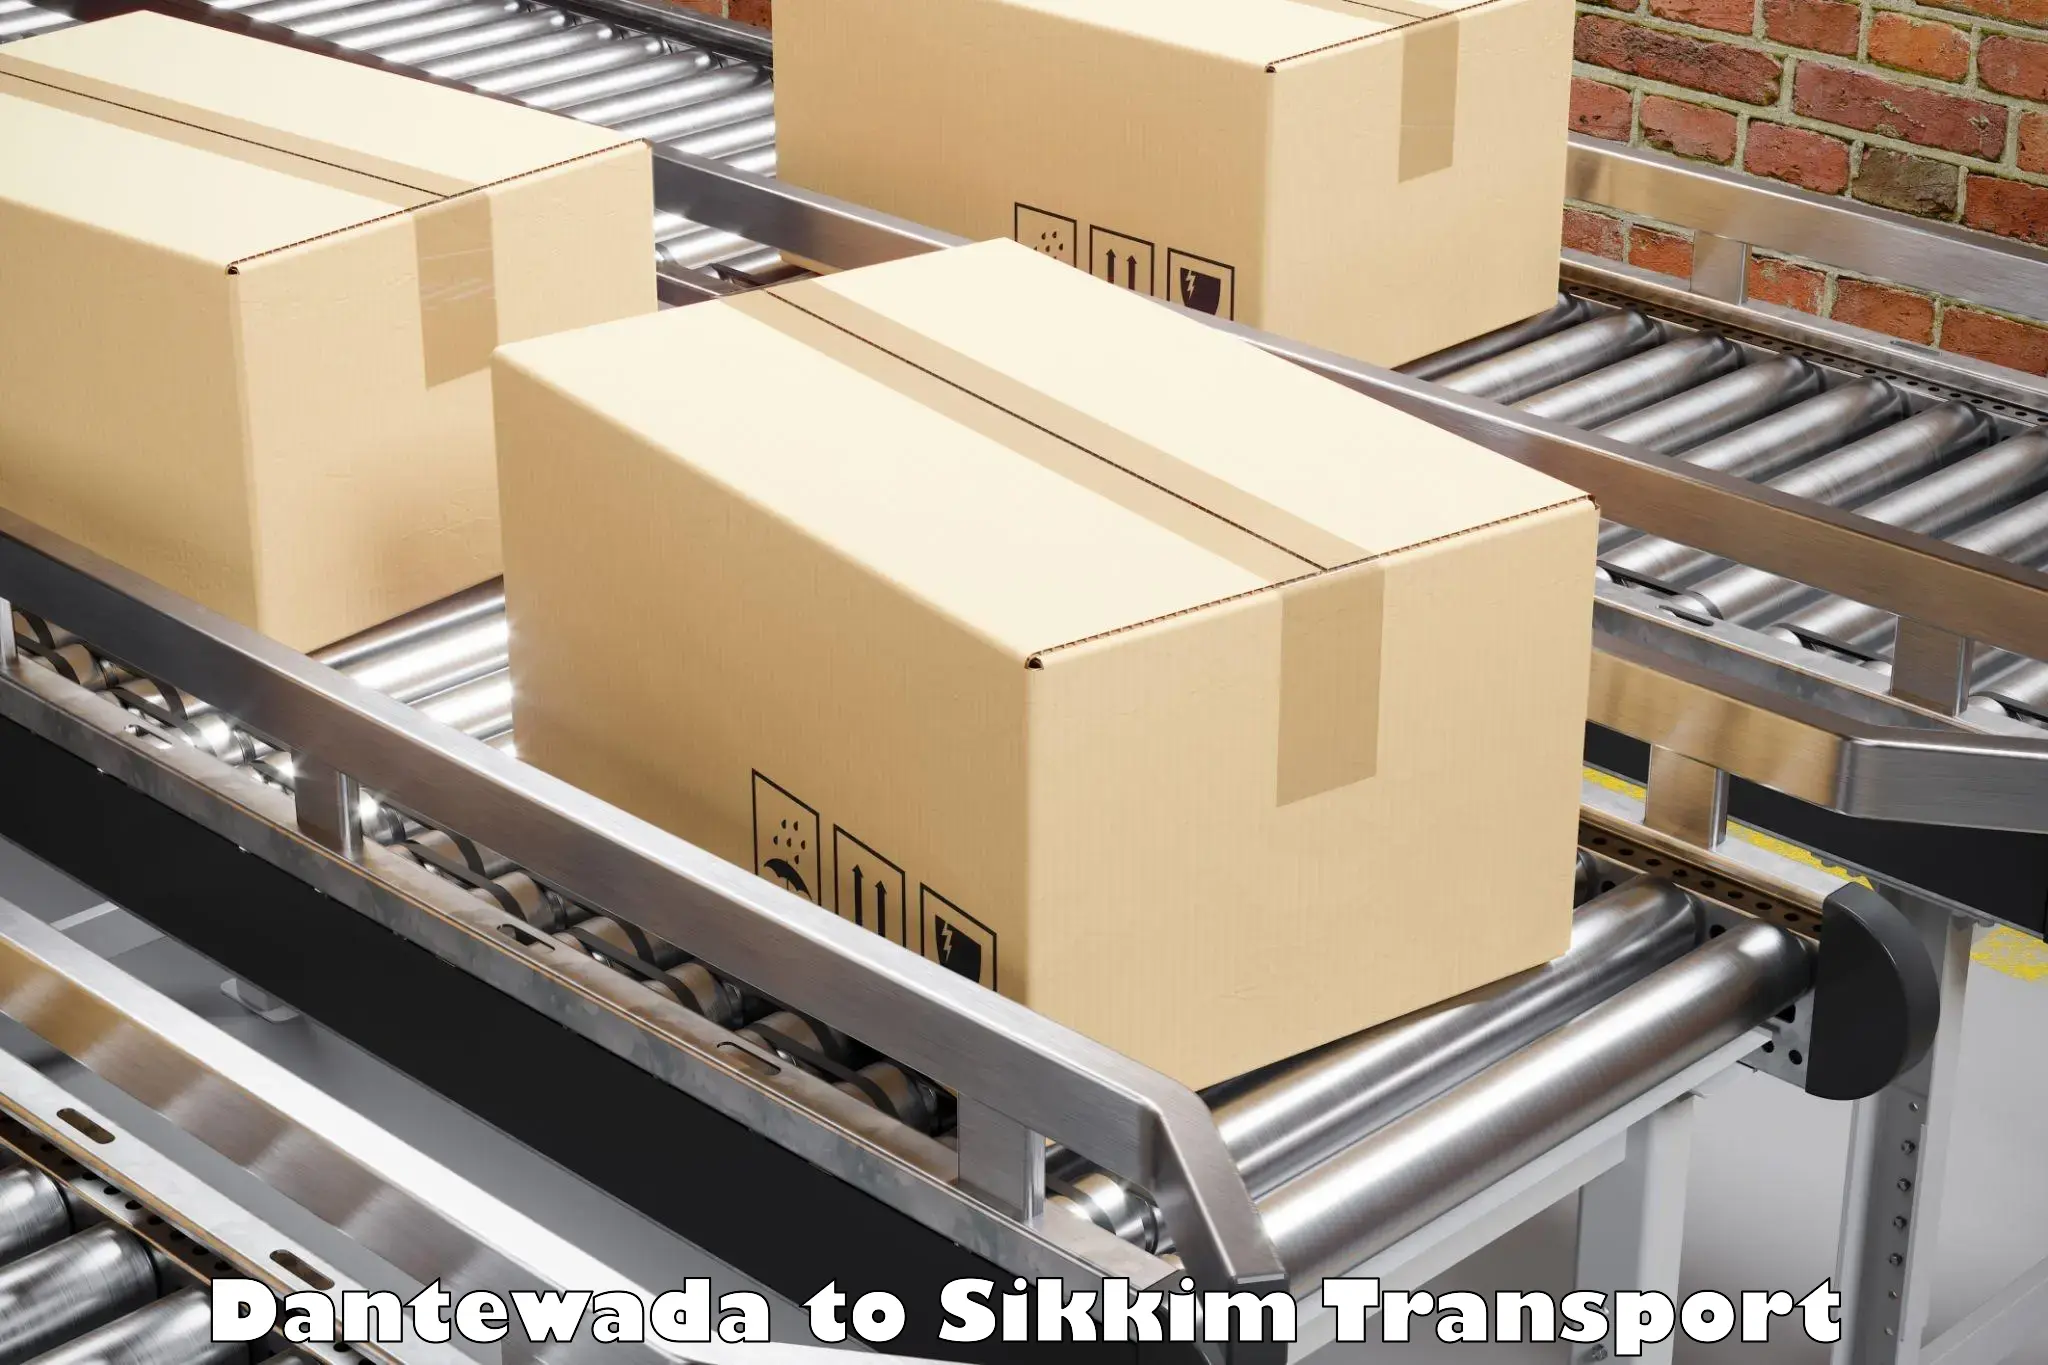 Container transport service Dantewada to South Sikkim